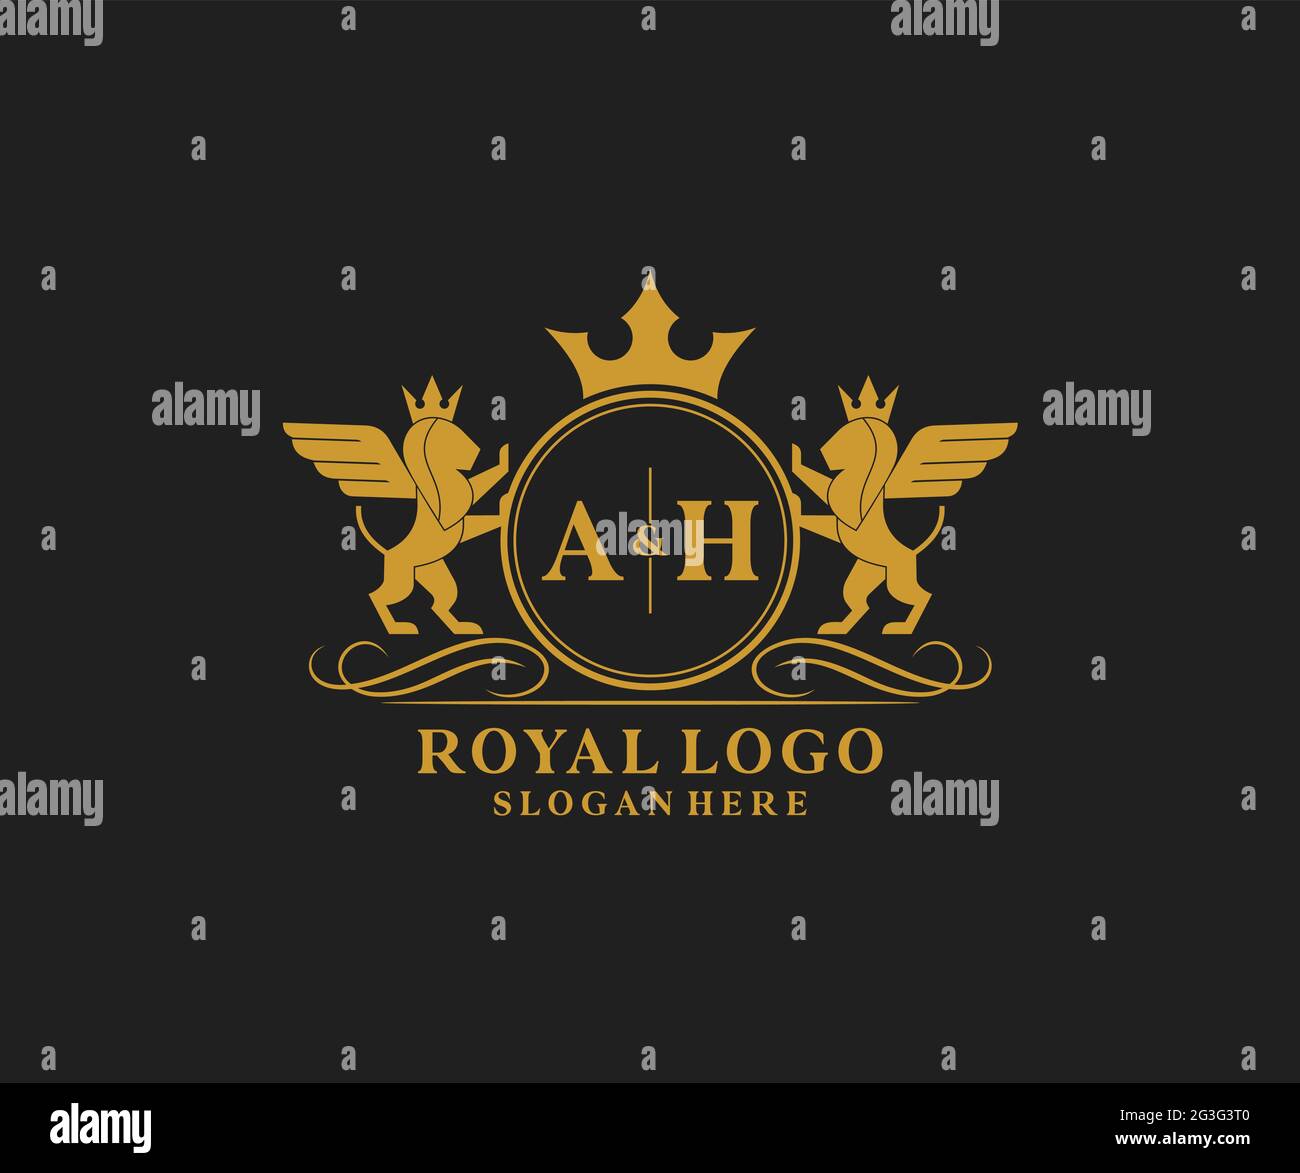 AH Letter Lion Royal Luxury Heraldic,Crest Logo template in vector art for Restaurant, Royalty, Boutique, Cafe, Hotel, Heraldic, Jewelry, Fashion and Stock Vector